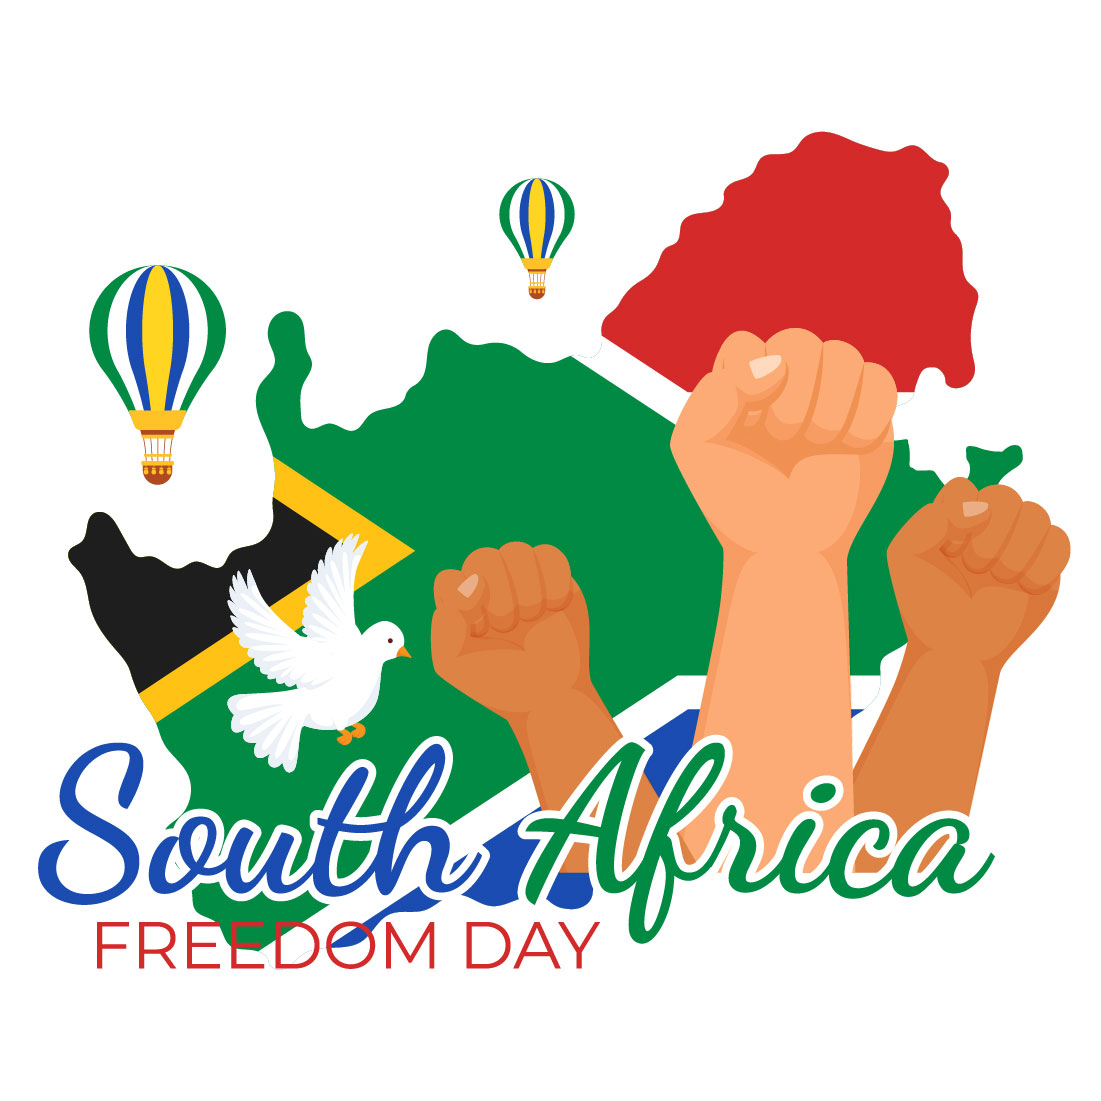 12 South Africa Freedom Day Illustration preview image.